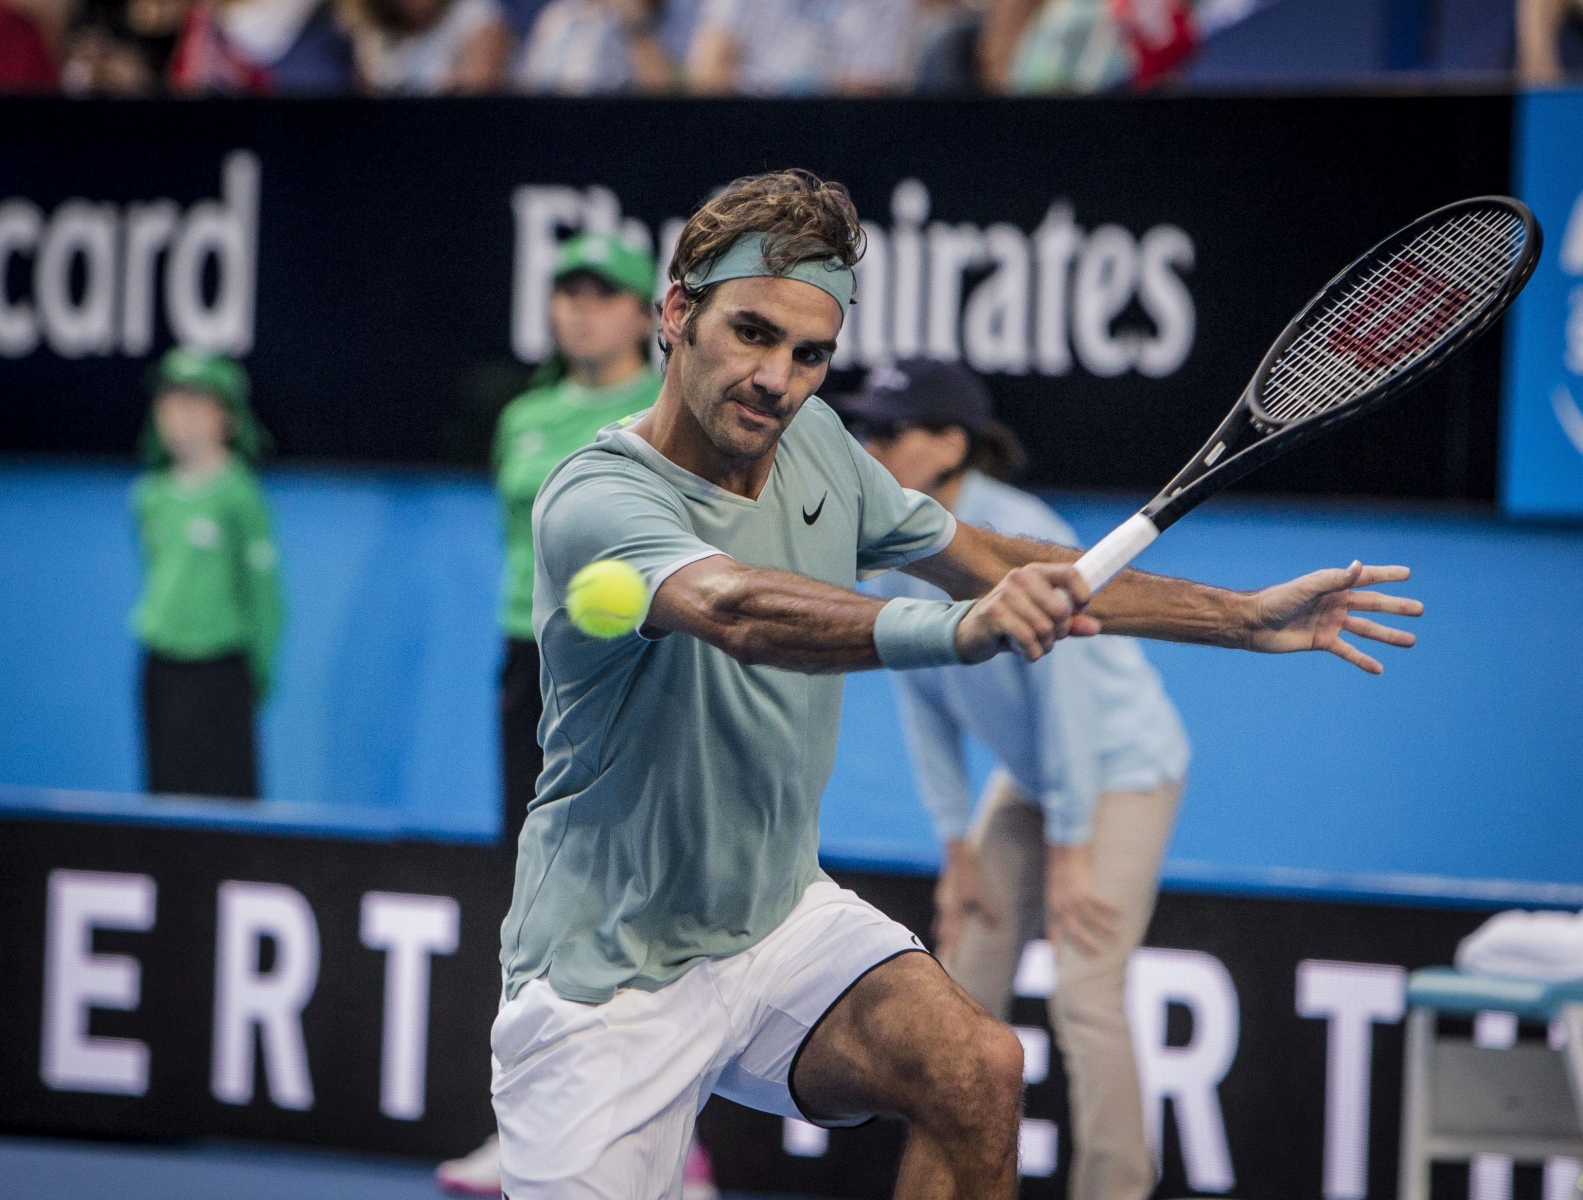 epa05695008 Roger Federer of Switzerland in action against Dan Evans of Britain during their men's singles match of the Hopman Cup at the Arena in Perth, Australia, 02 January 2017.  EPA/TONY MCDONOUGH  AUSTRALIA AND NEW ZEALAND OUT